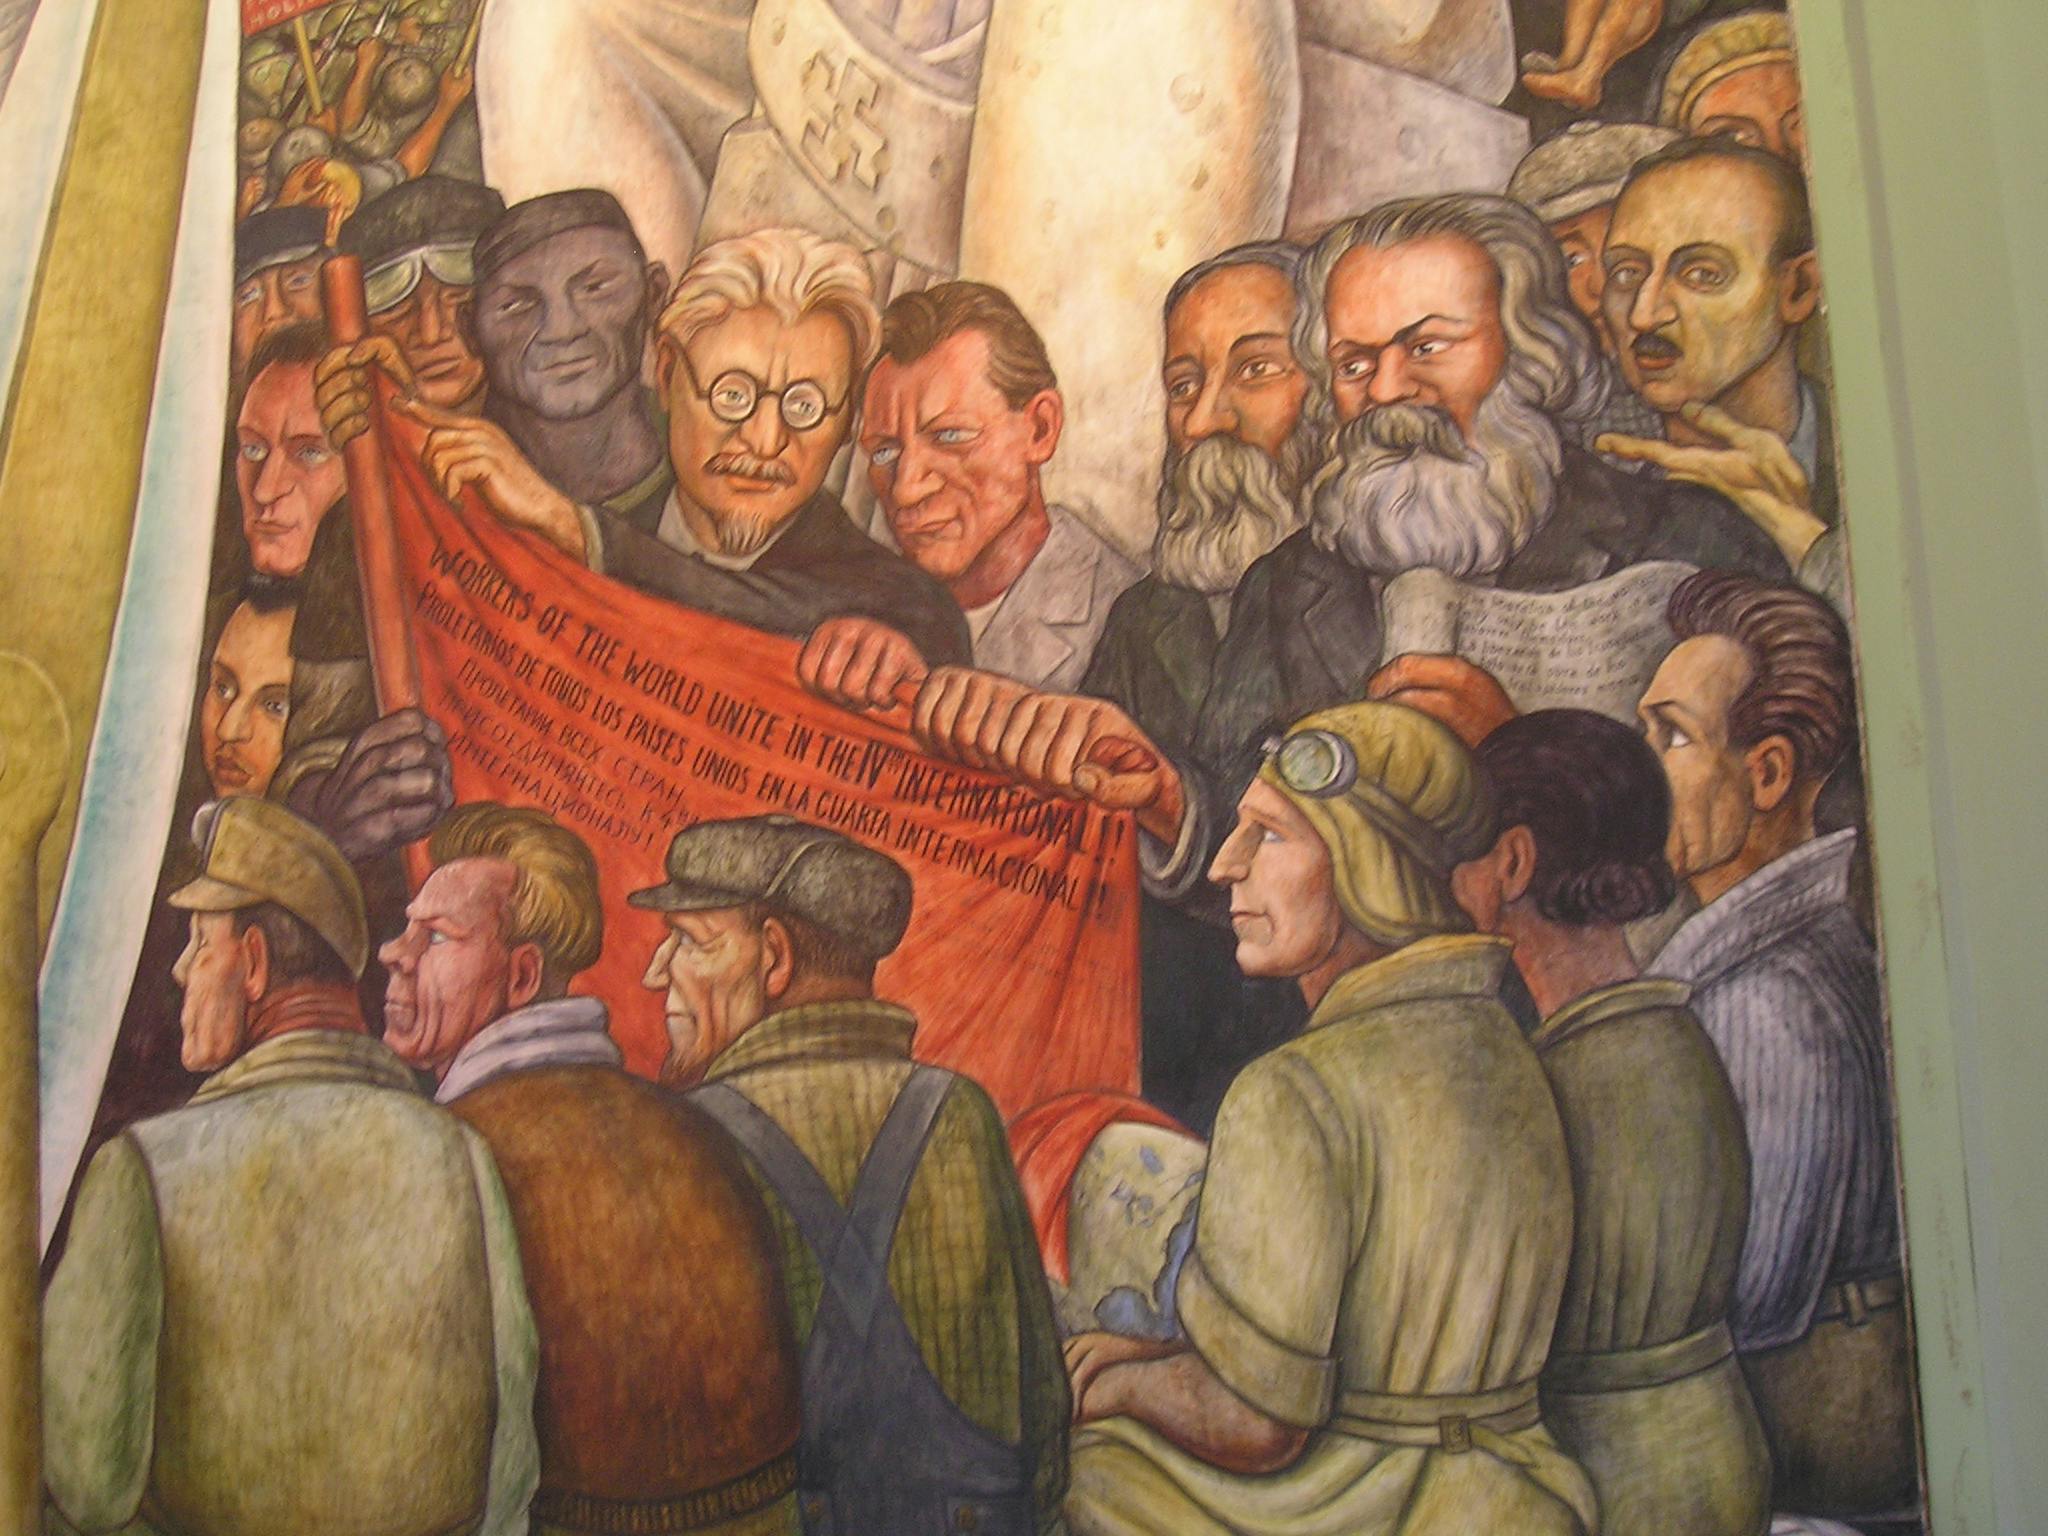 Trotsky’s theory of permanent revolution